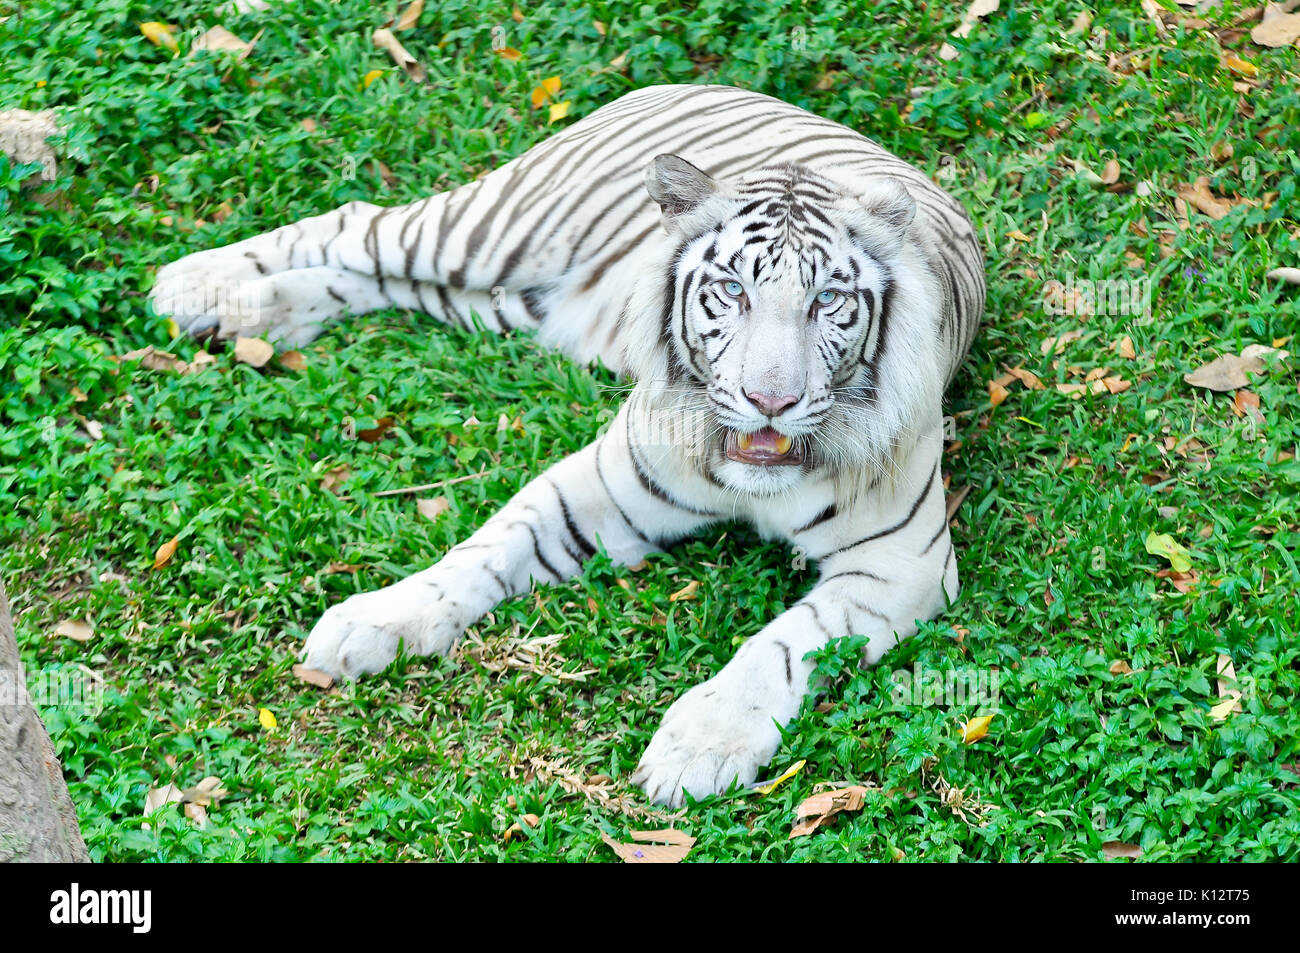 A white tiger in captivity at a zoo. The presence of stripes indicates it is not a true albino. Stock Photo